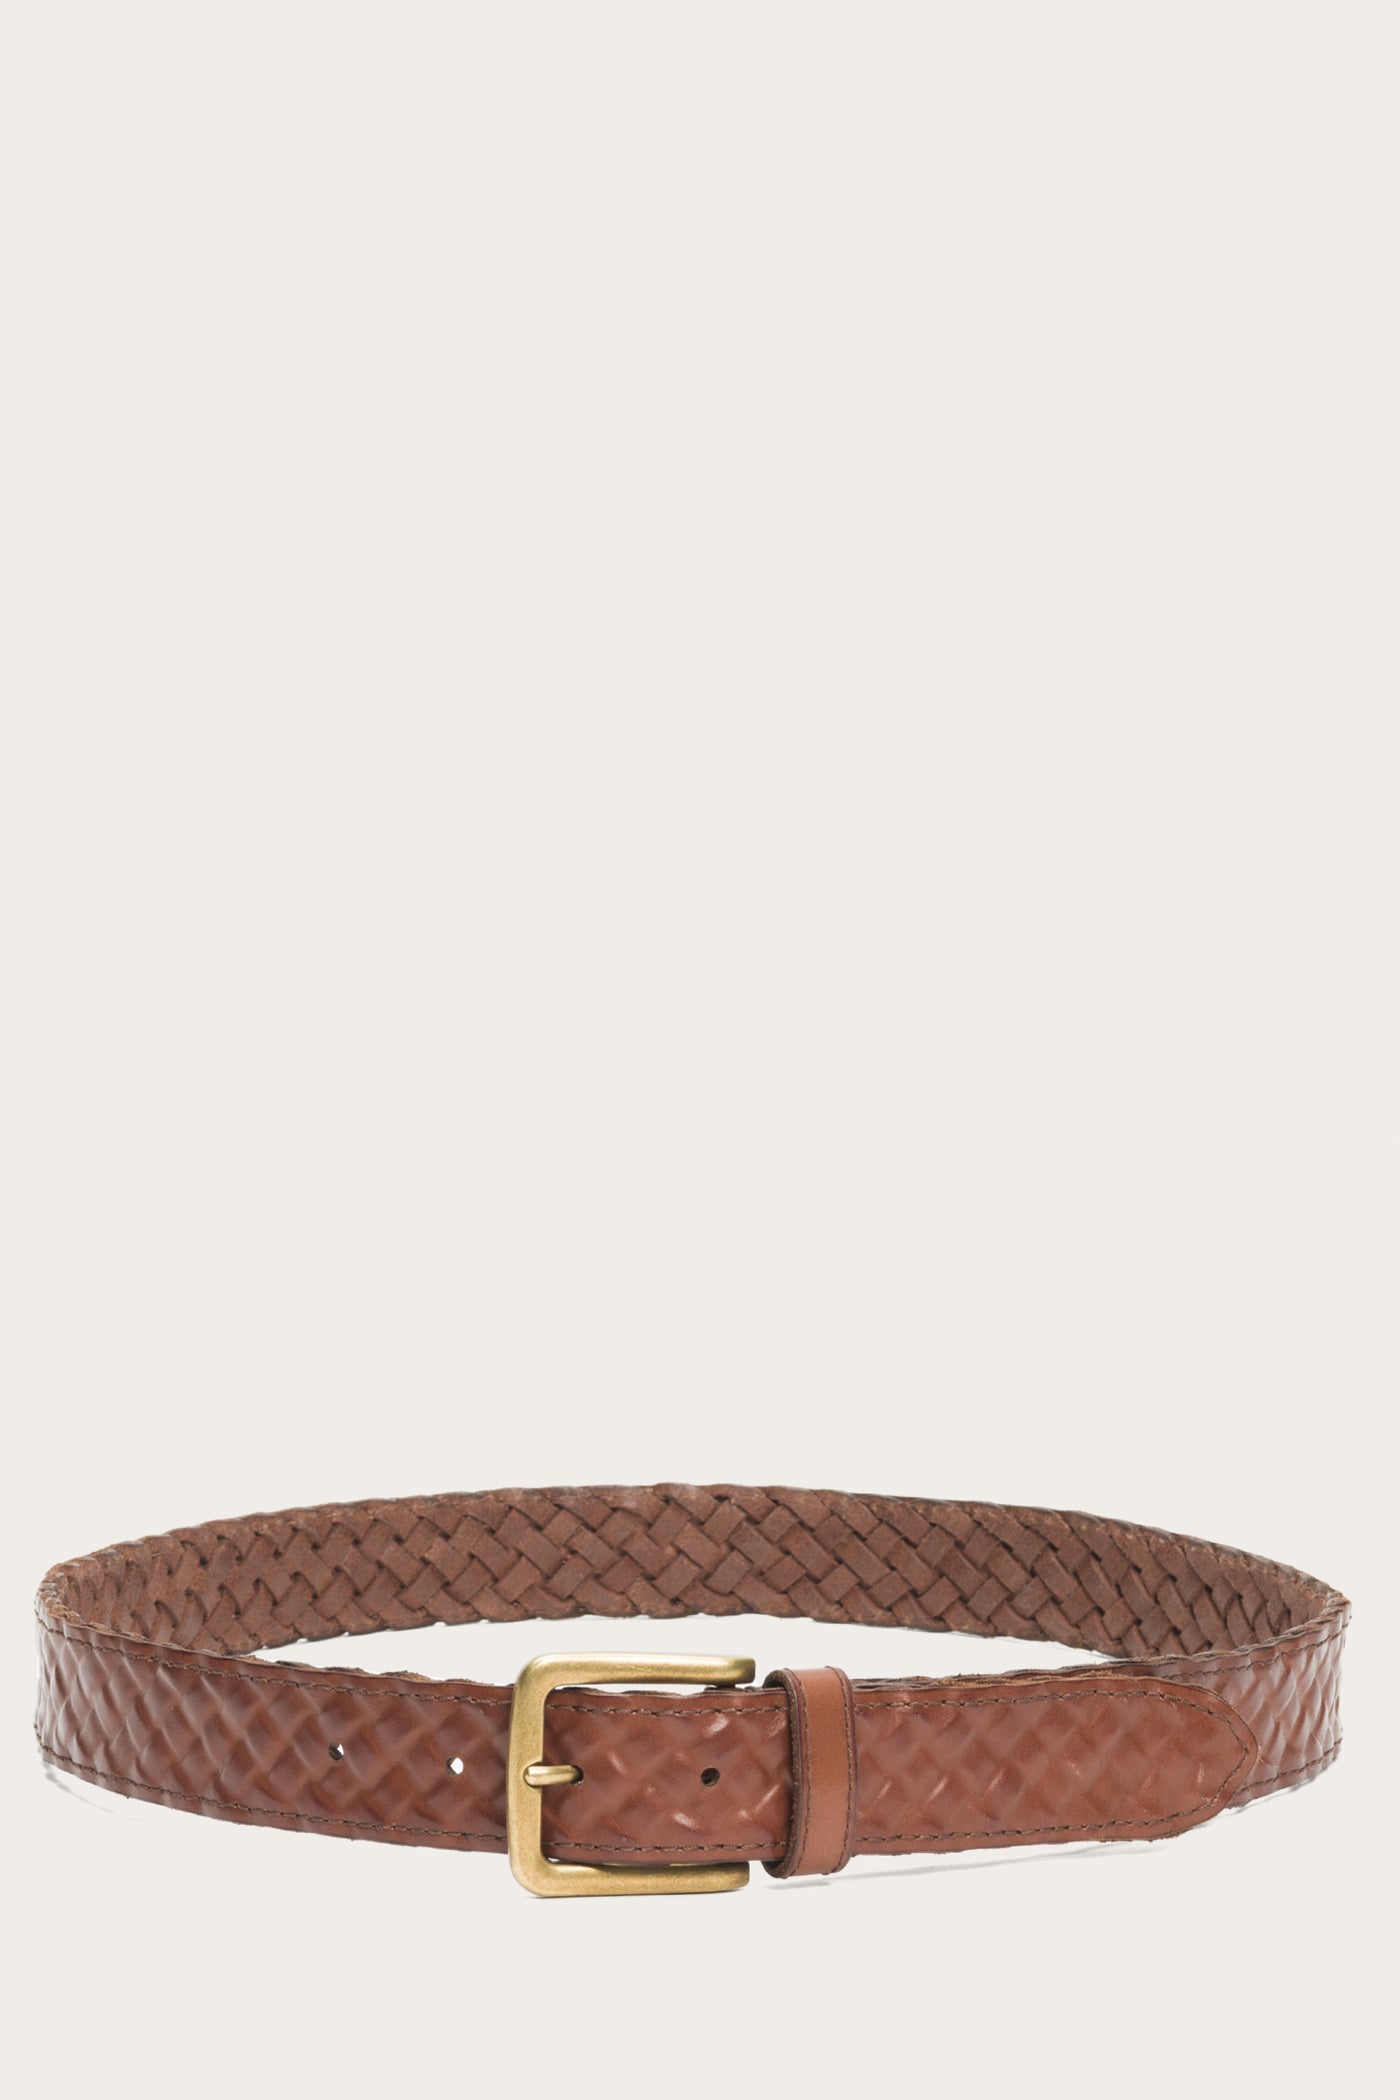 Leather Covered Woven Belt | Tan Leather Belt | Frye